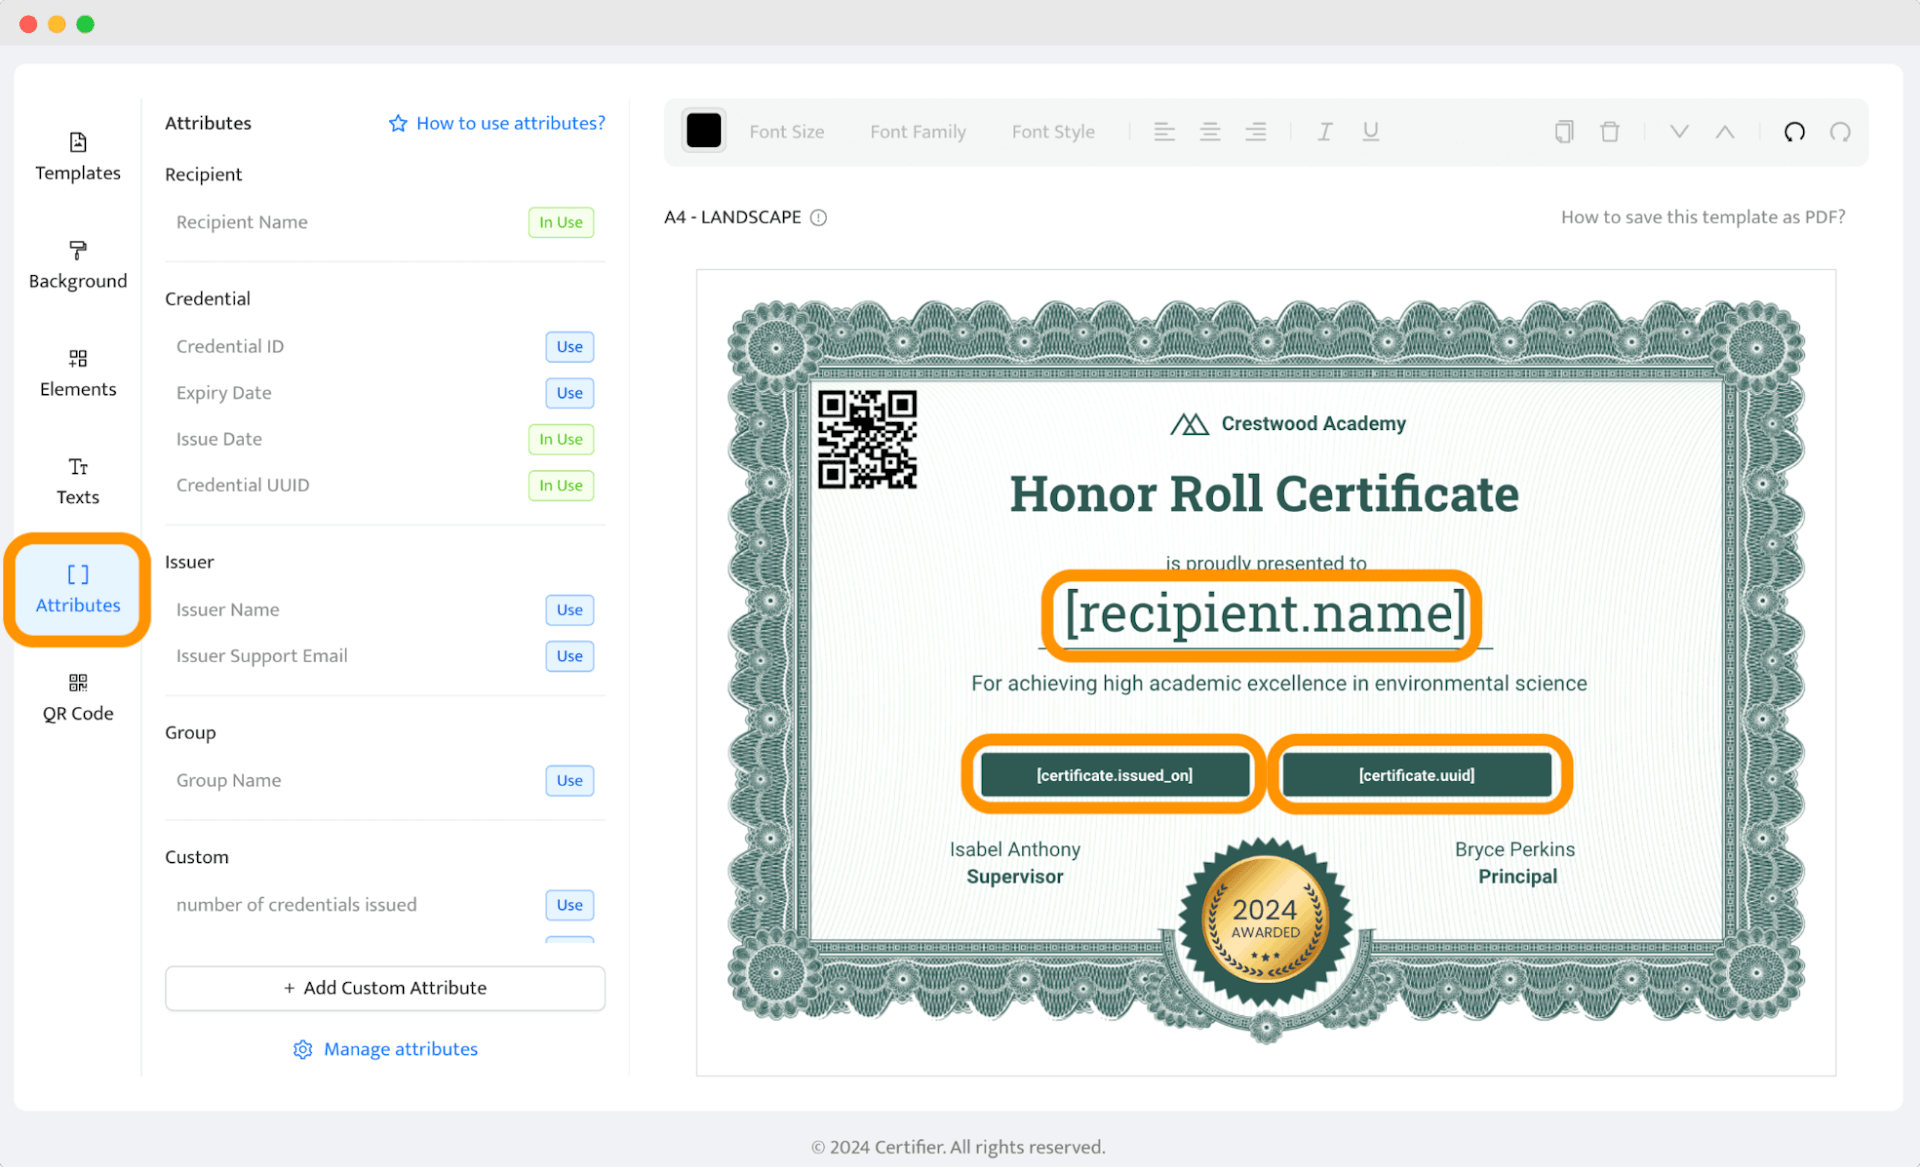 Adding dynamic attributes to the membership certificate template.